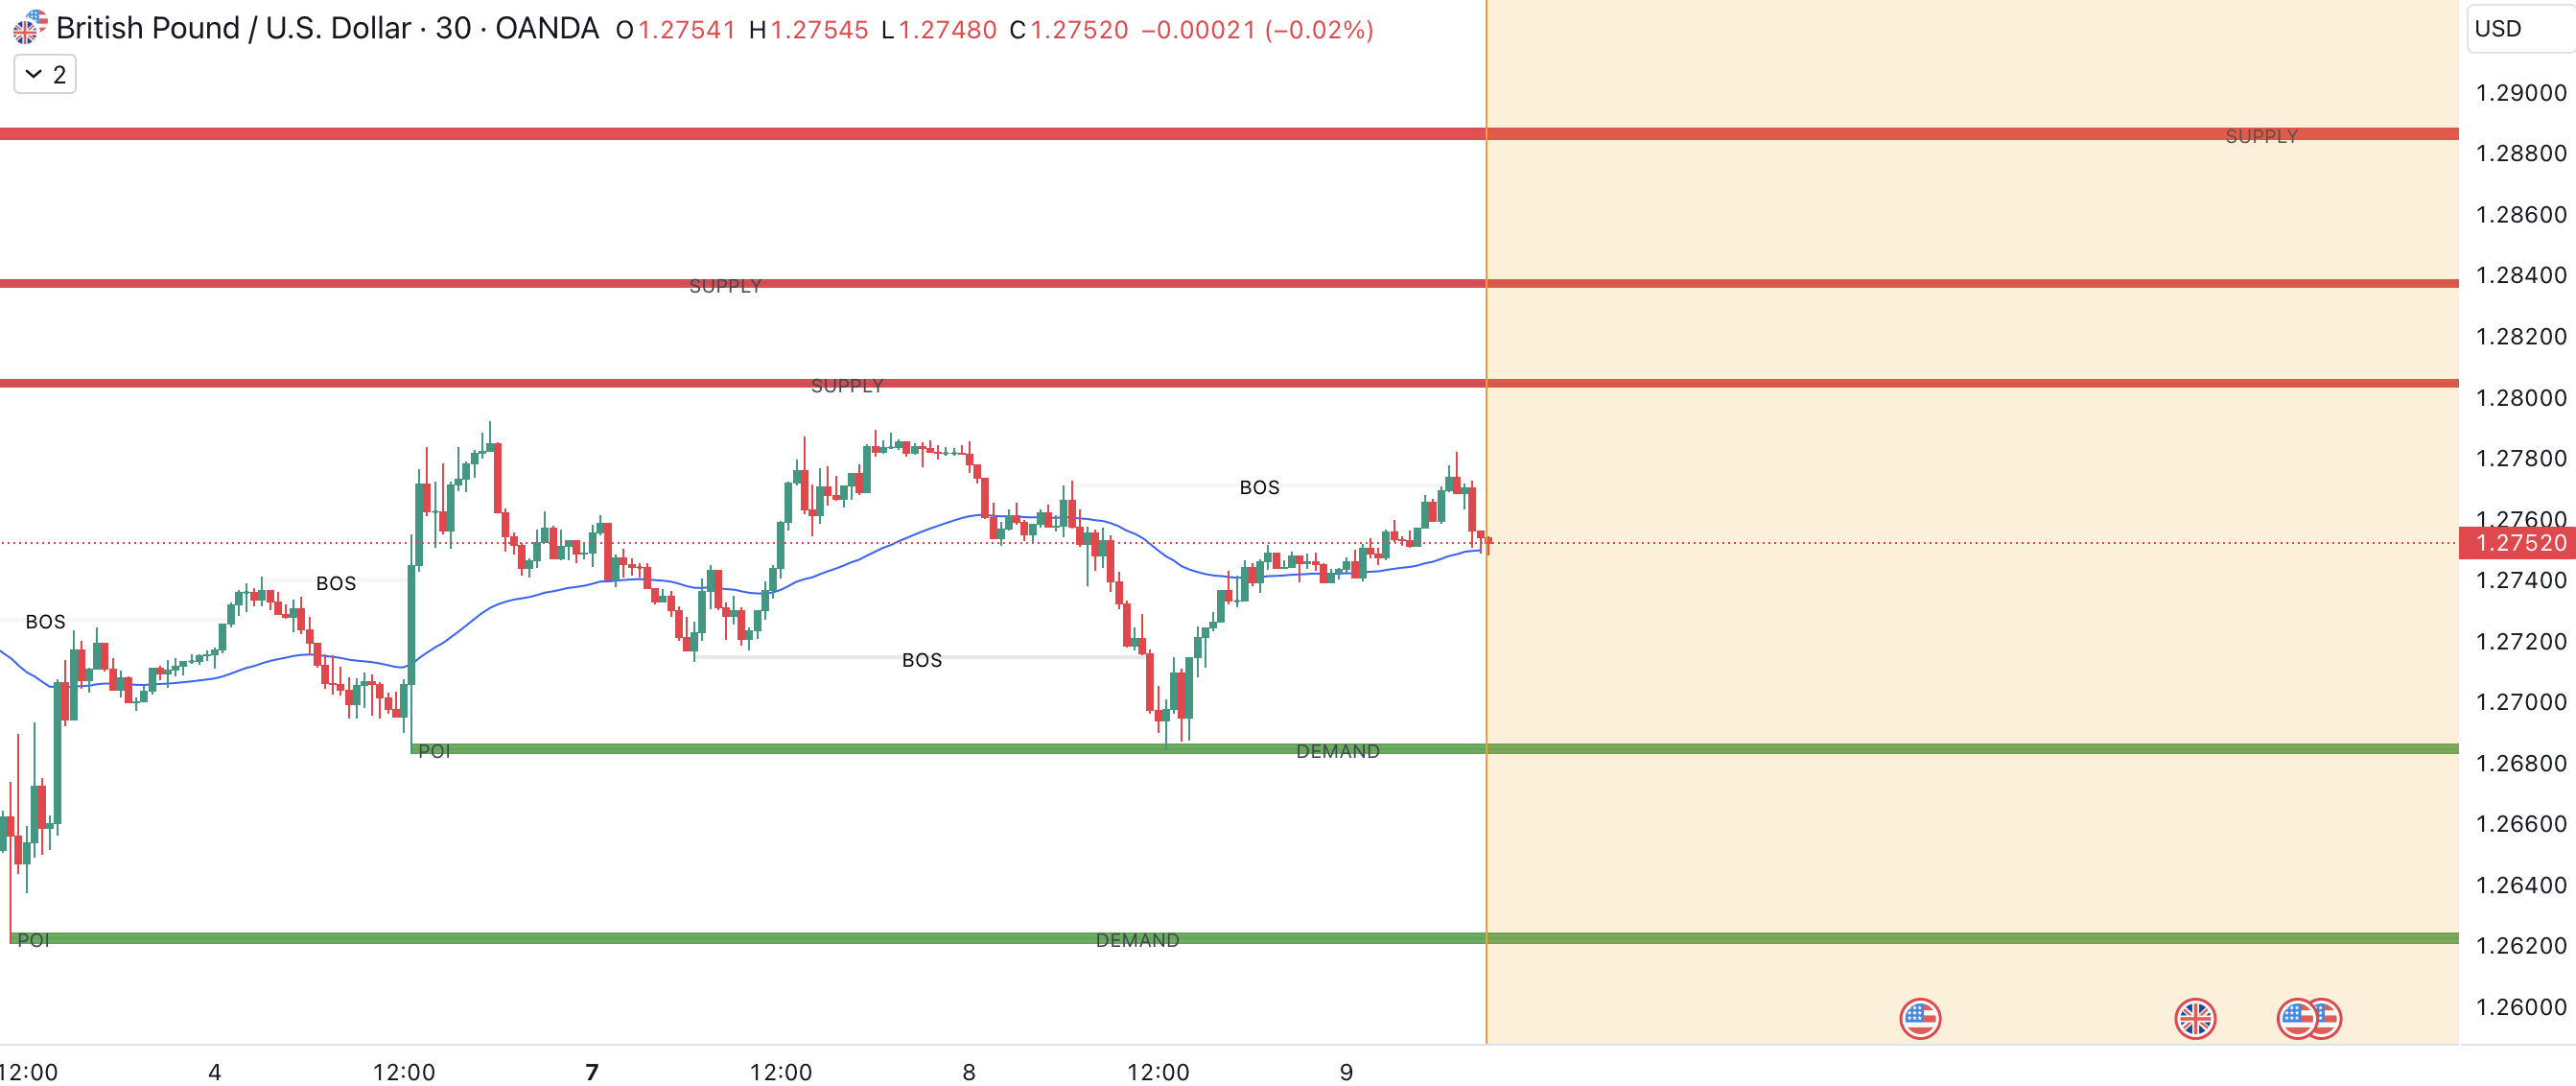 GBP/USD 30M Support and Resistance